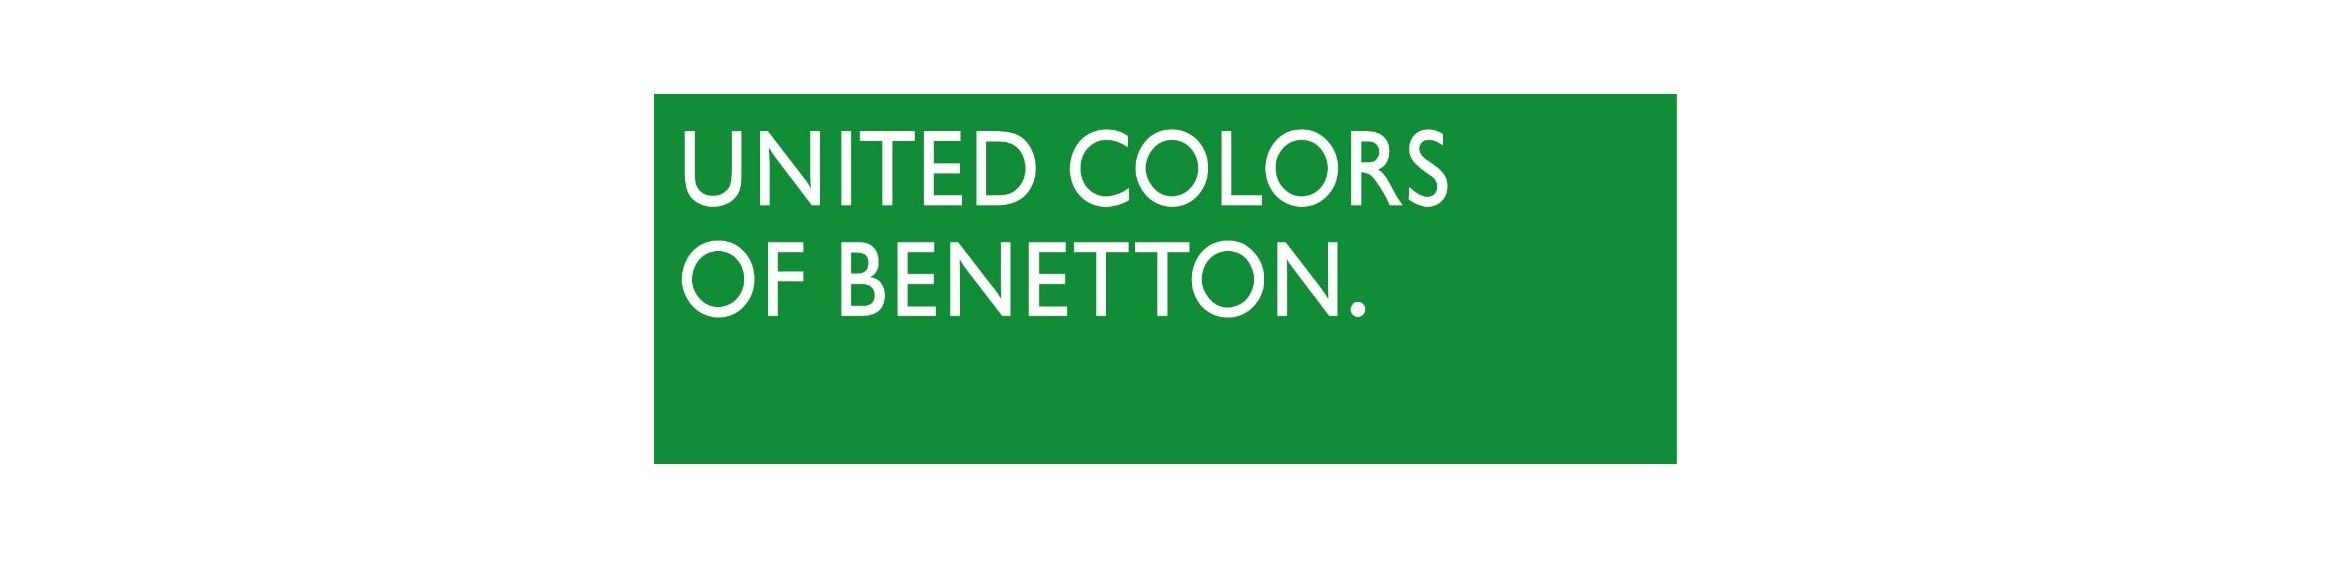 47947United Colors of Benetton